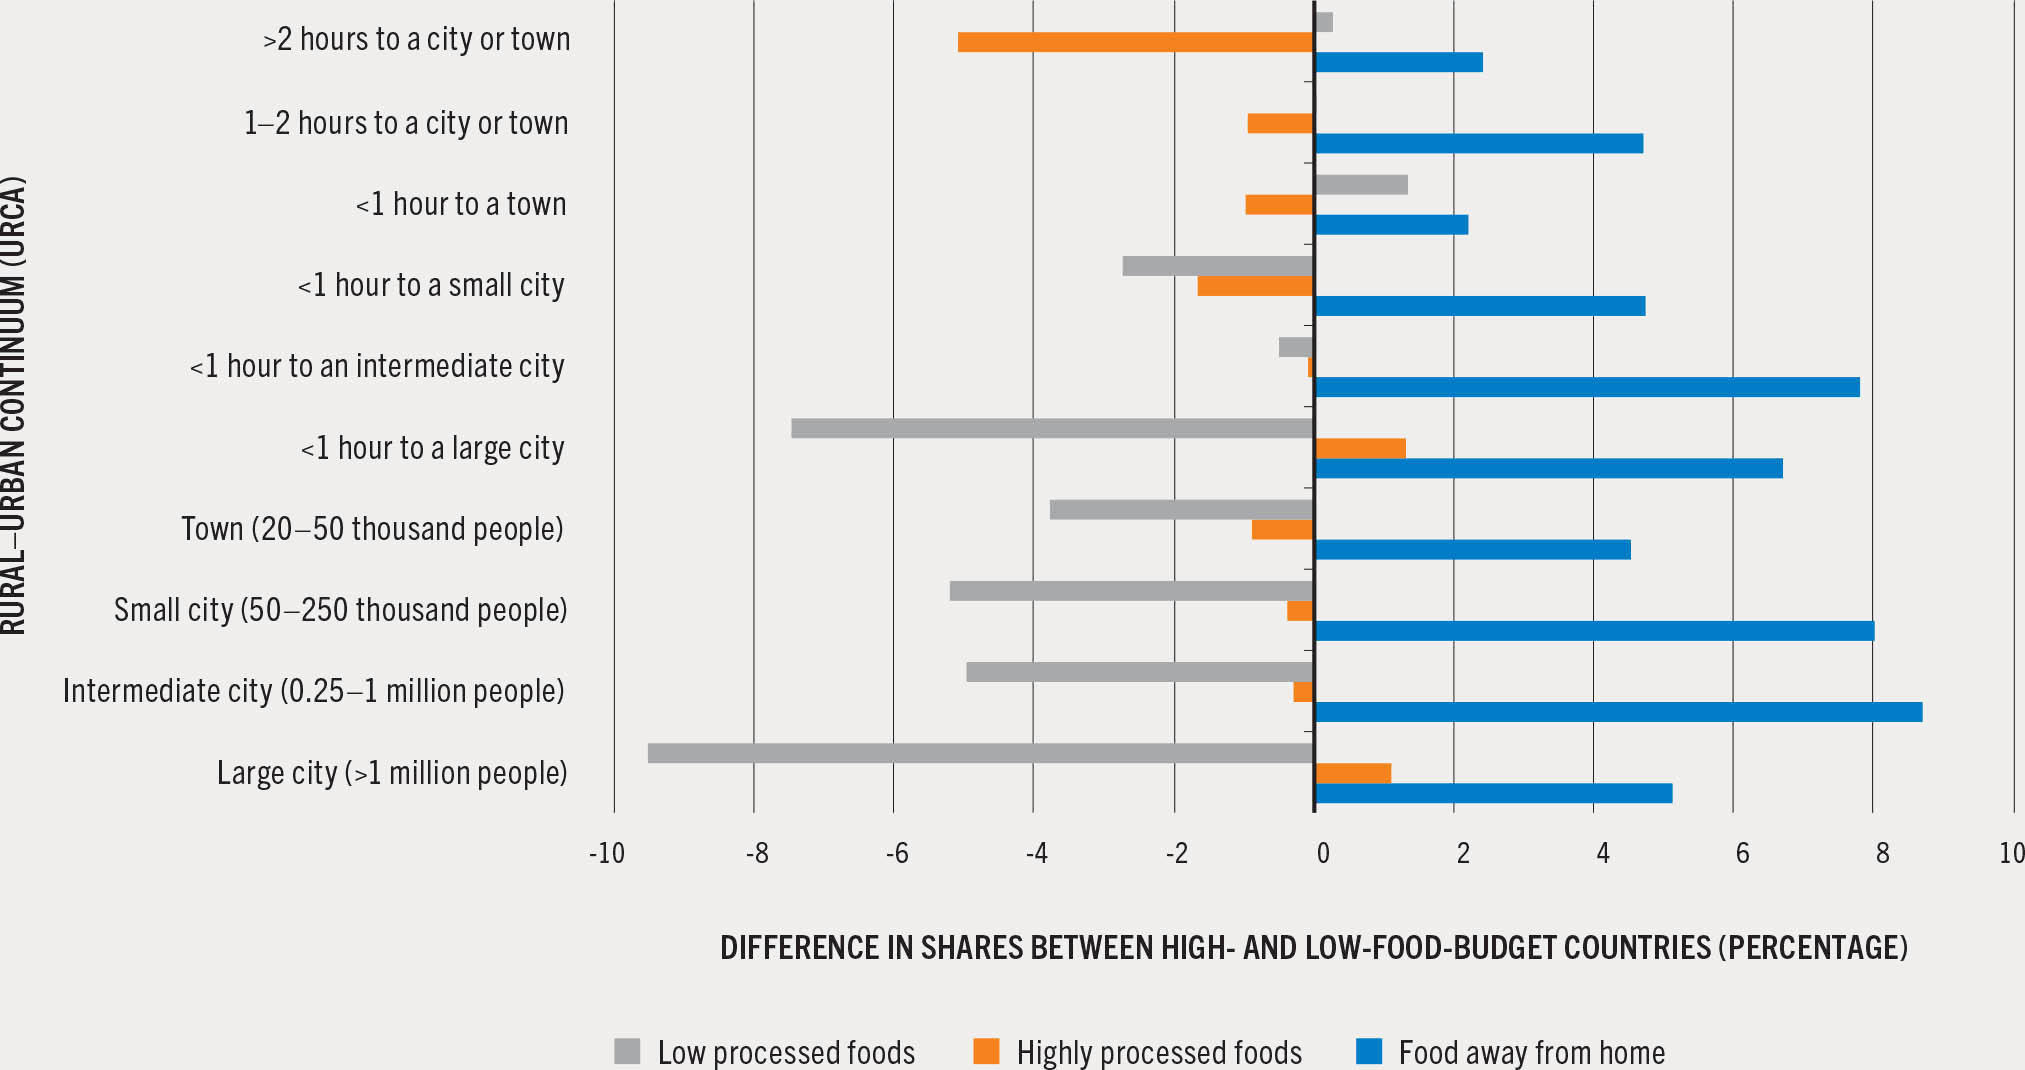 A bar chart plots the difference in consumption shares of low processed, highly processed and food away from home food between low- and high-food-budget countries across the rural–urban continuum.